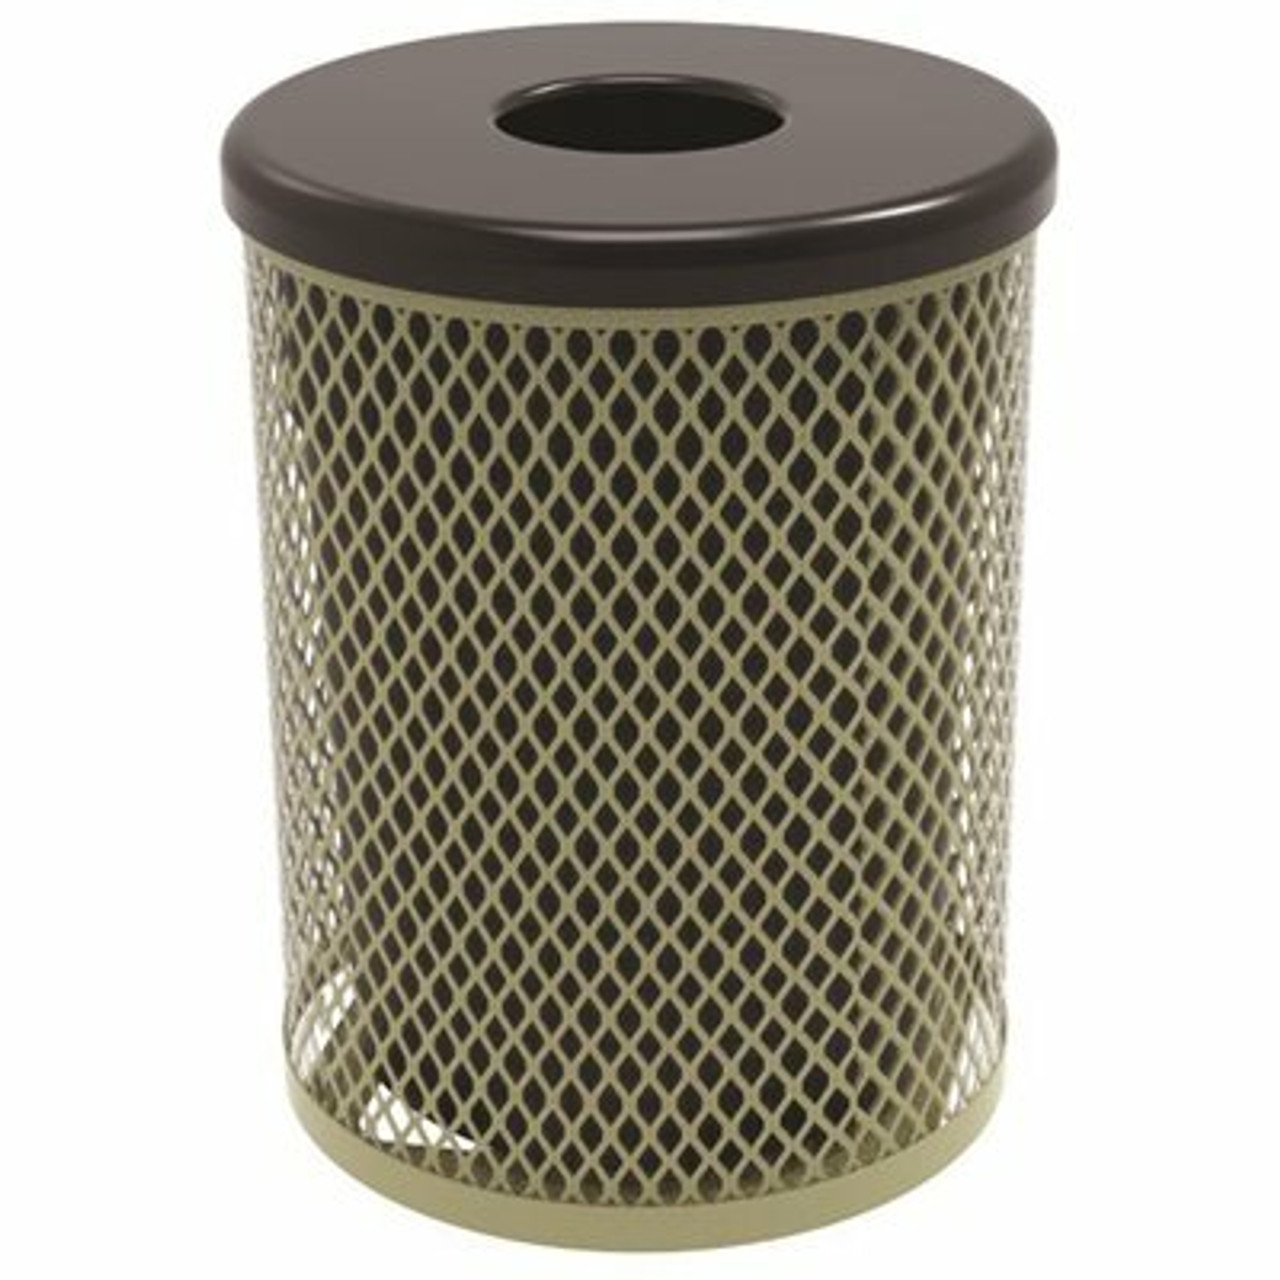 Everest 55 Gal. Beige Trash Receptacle With Flat Top